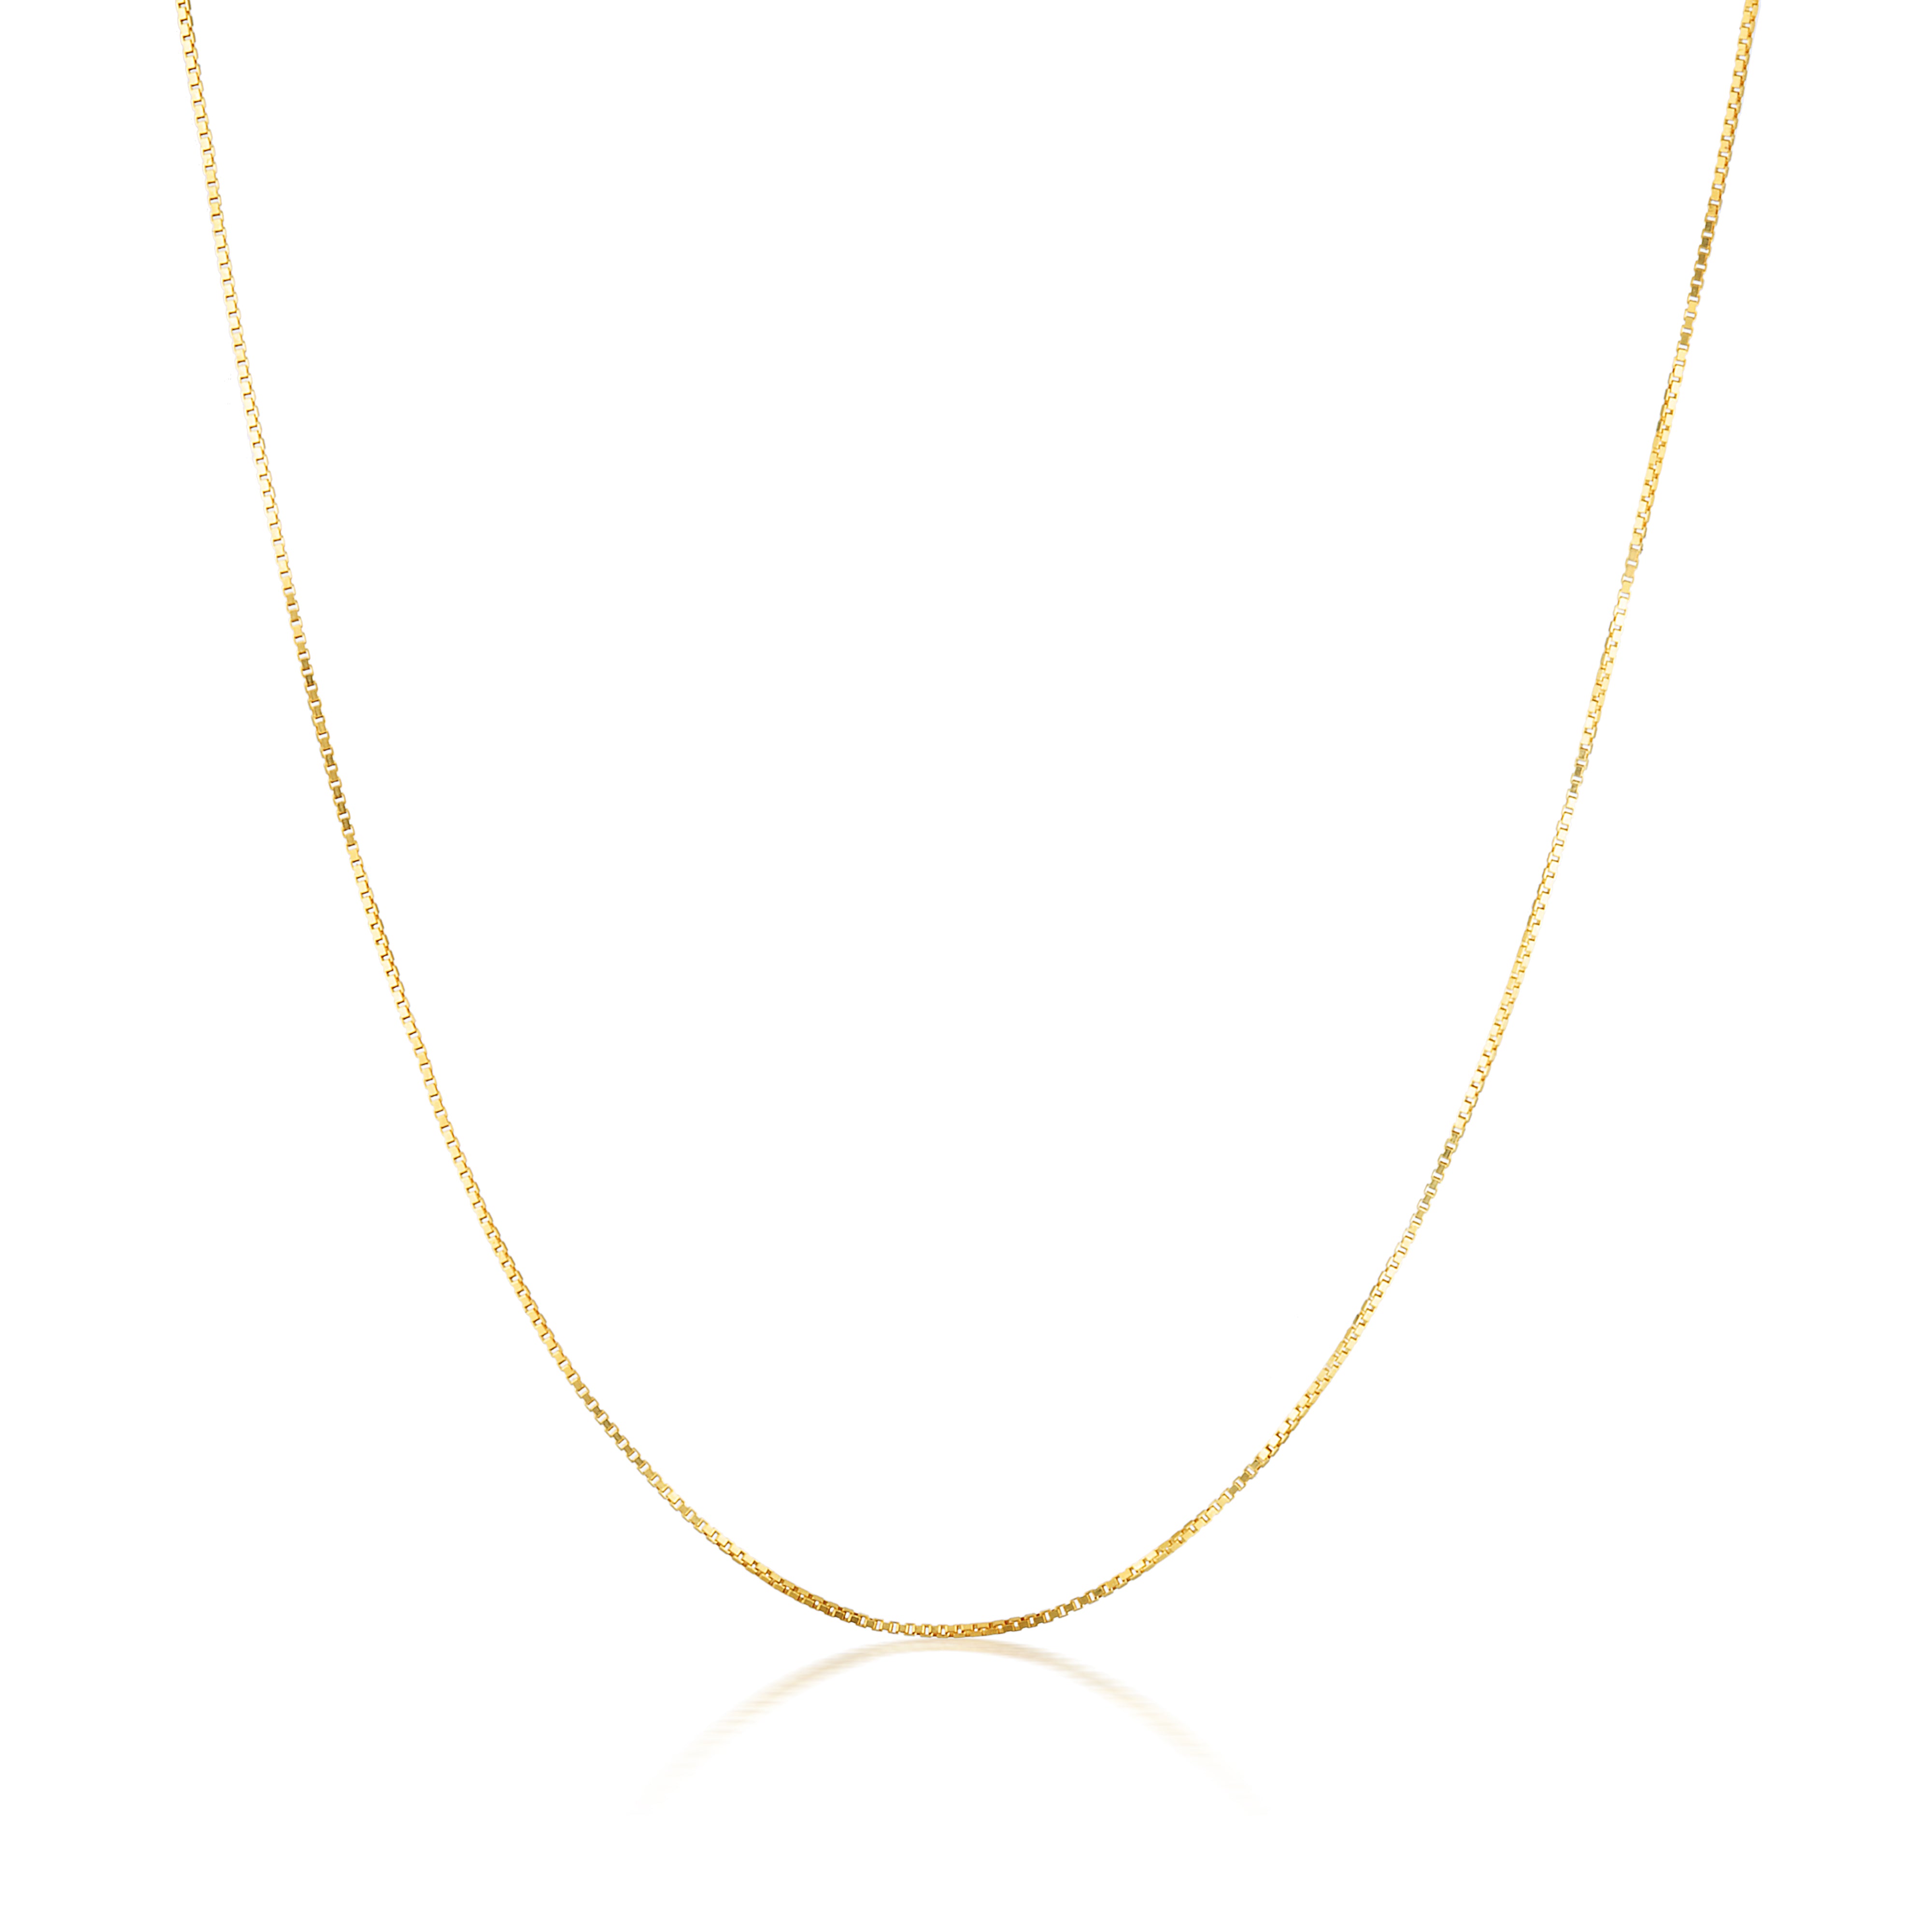 YELLOW GOLD 0.5MM BOX CHAIN 42+3CM EXTENSION IN 9CT